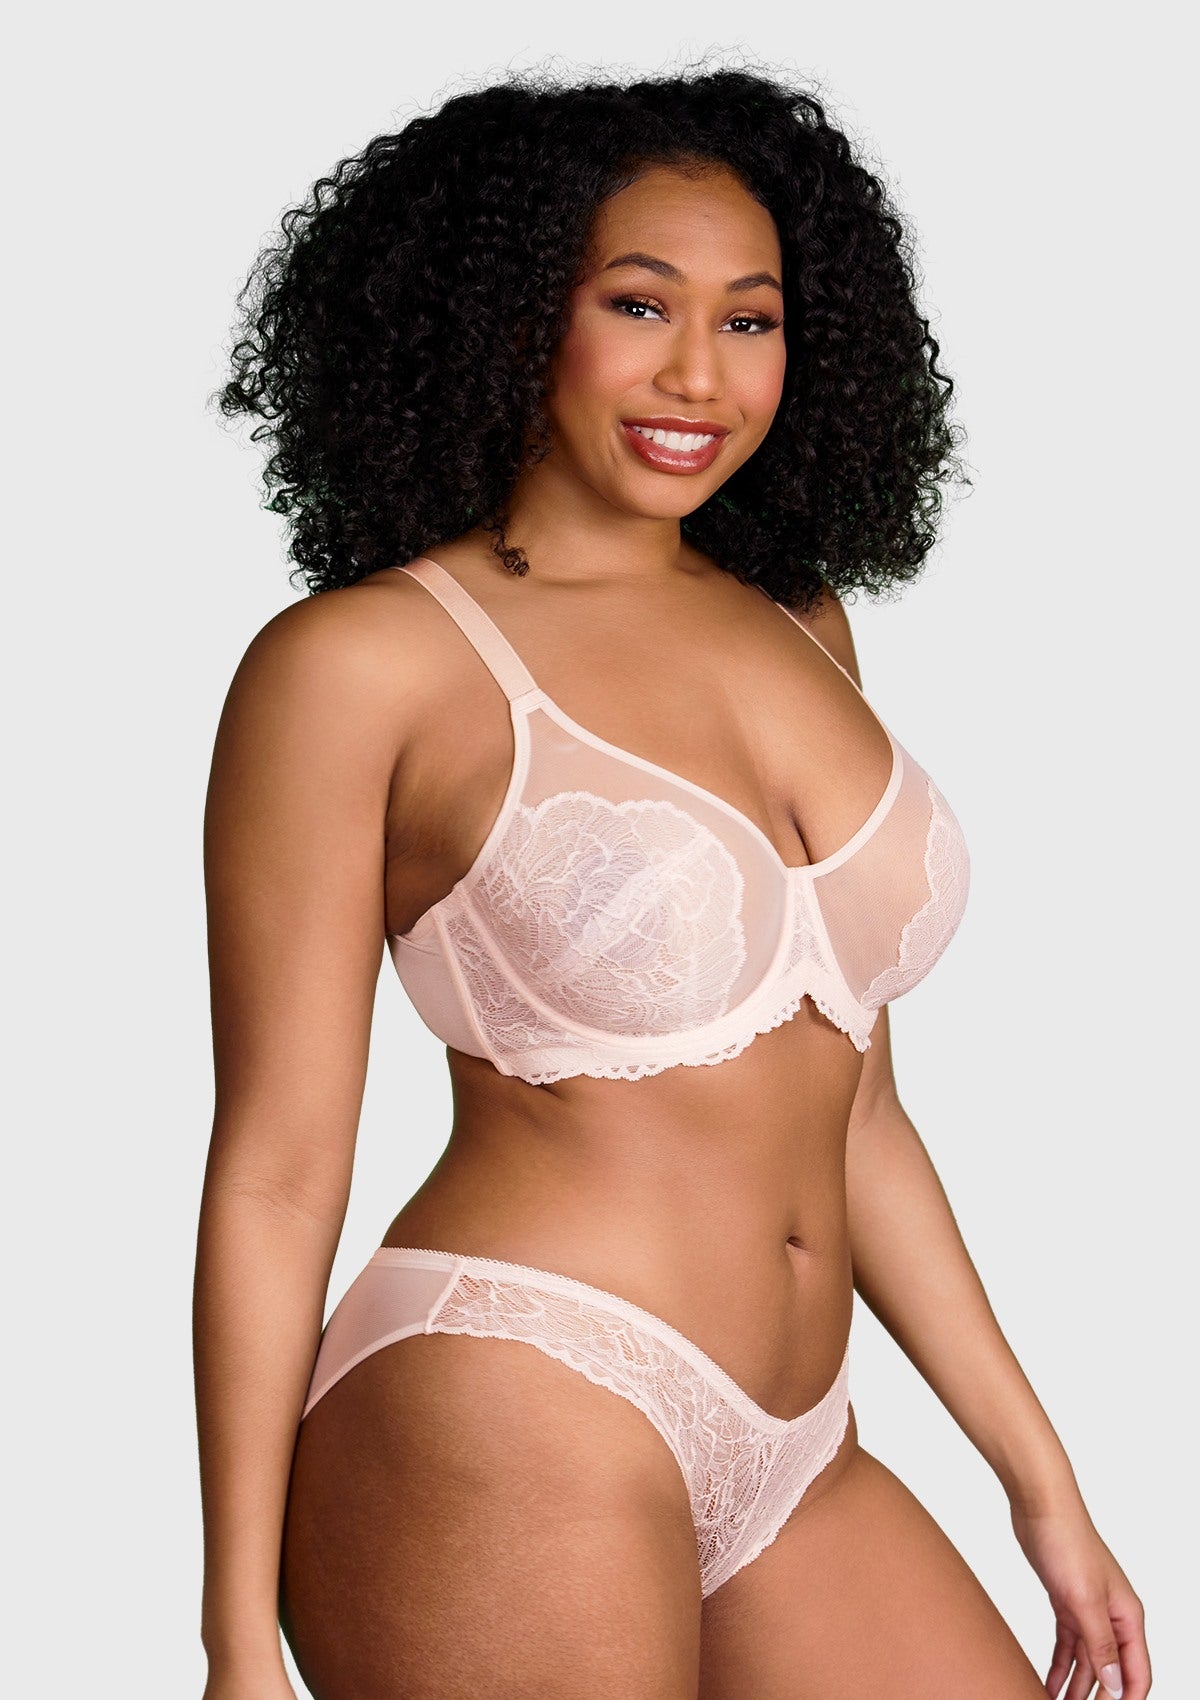 HSIA Blossom Sheer Lace Bra: Comfortable Underwire Bra For Big Busts - Dusty Peach / 40 / I